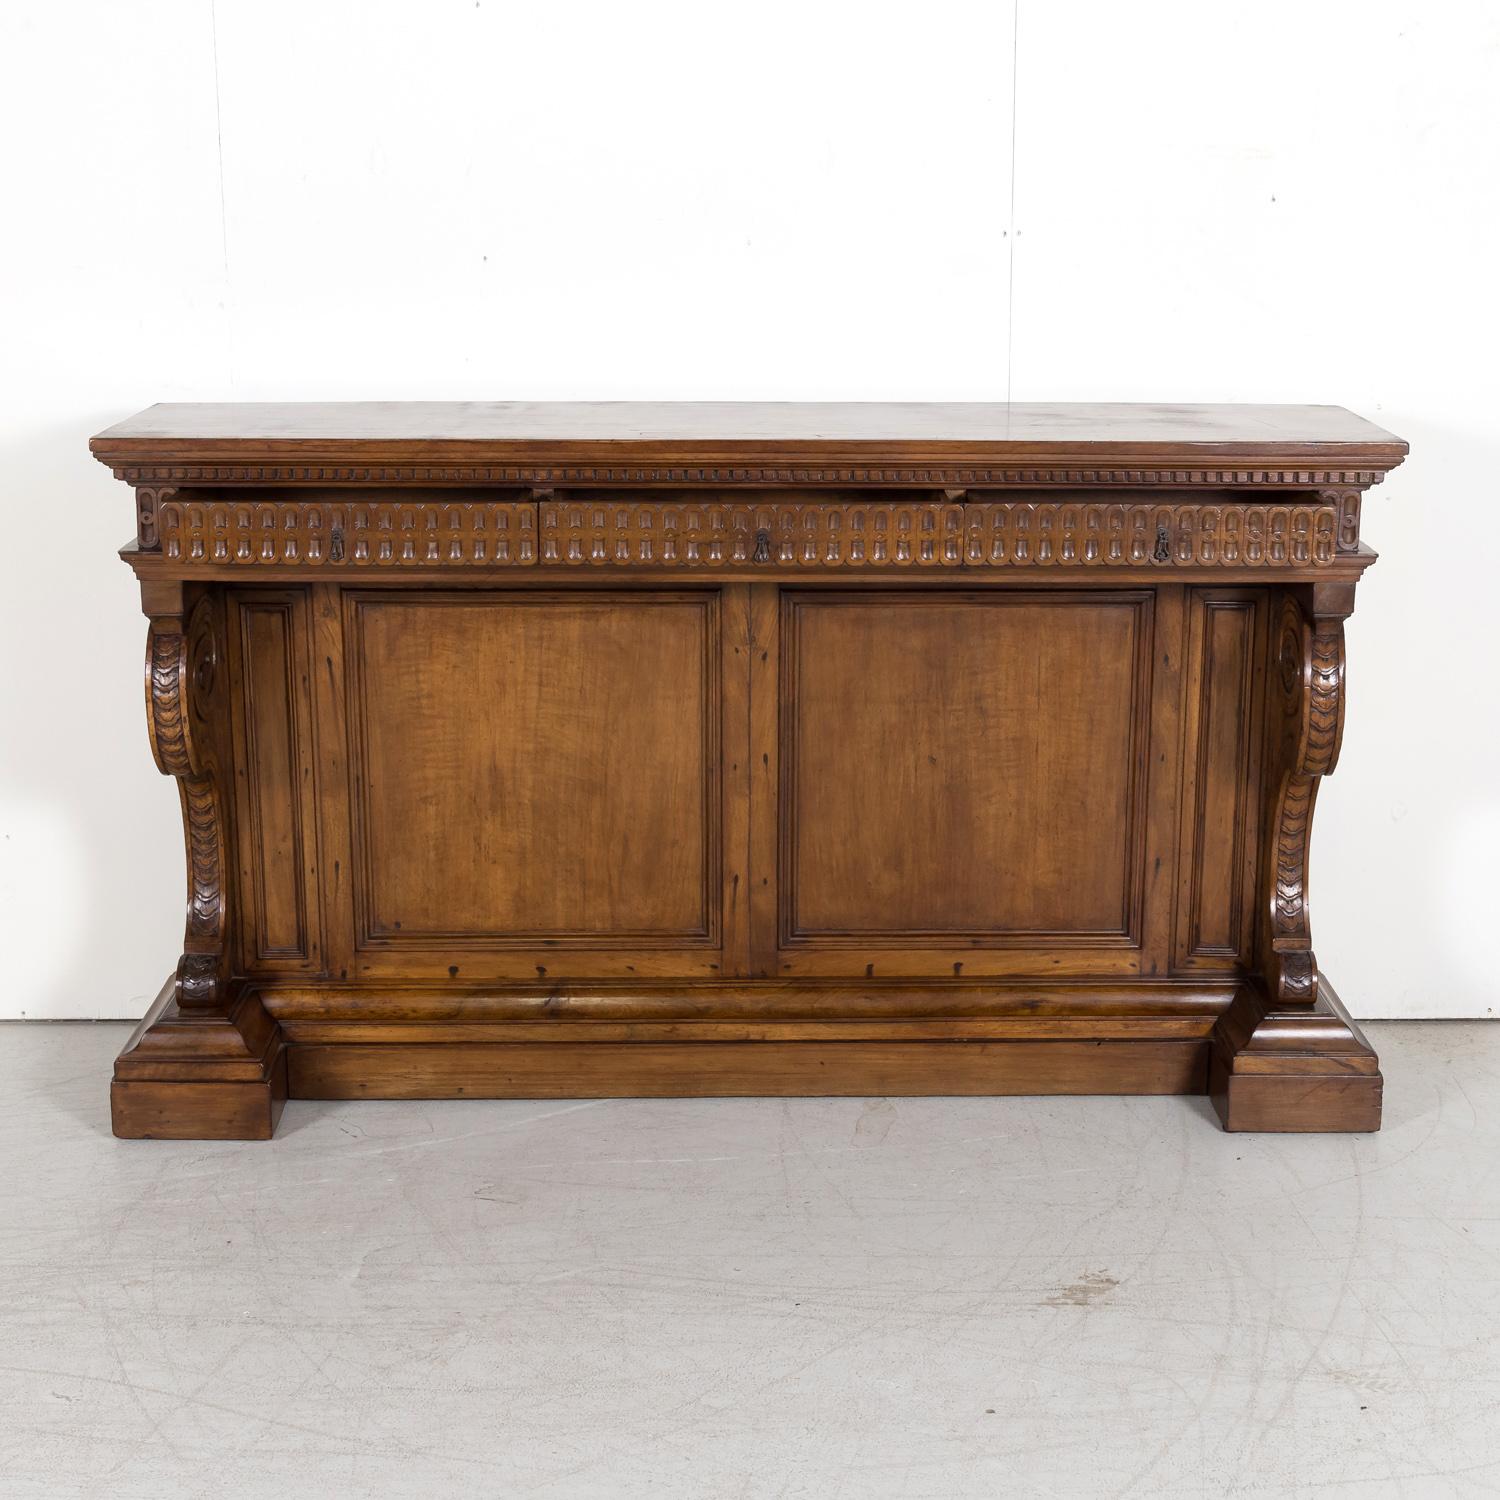 19th Century, Spanish Renaissance Style Carved Walnut Wall Console with Drawers For Sale 1